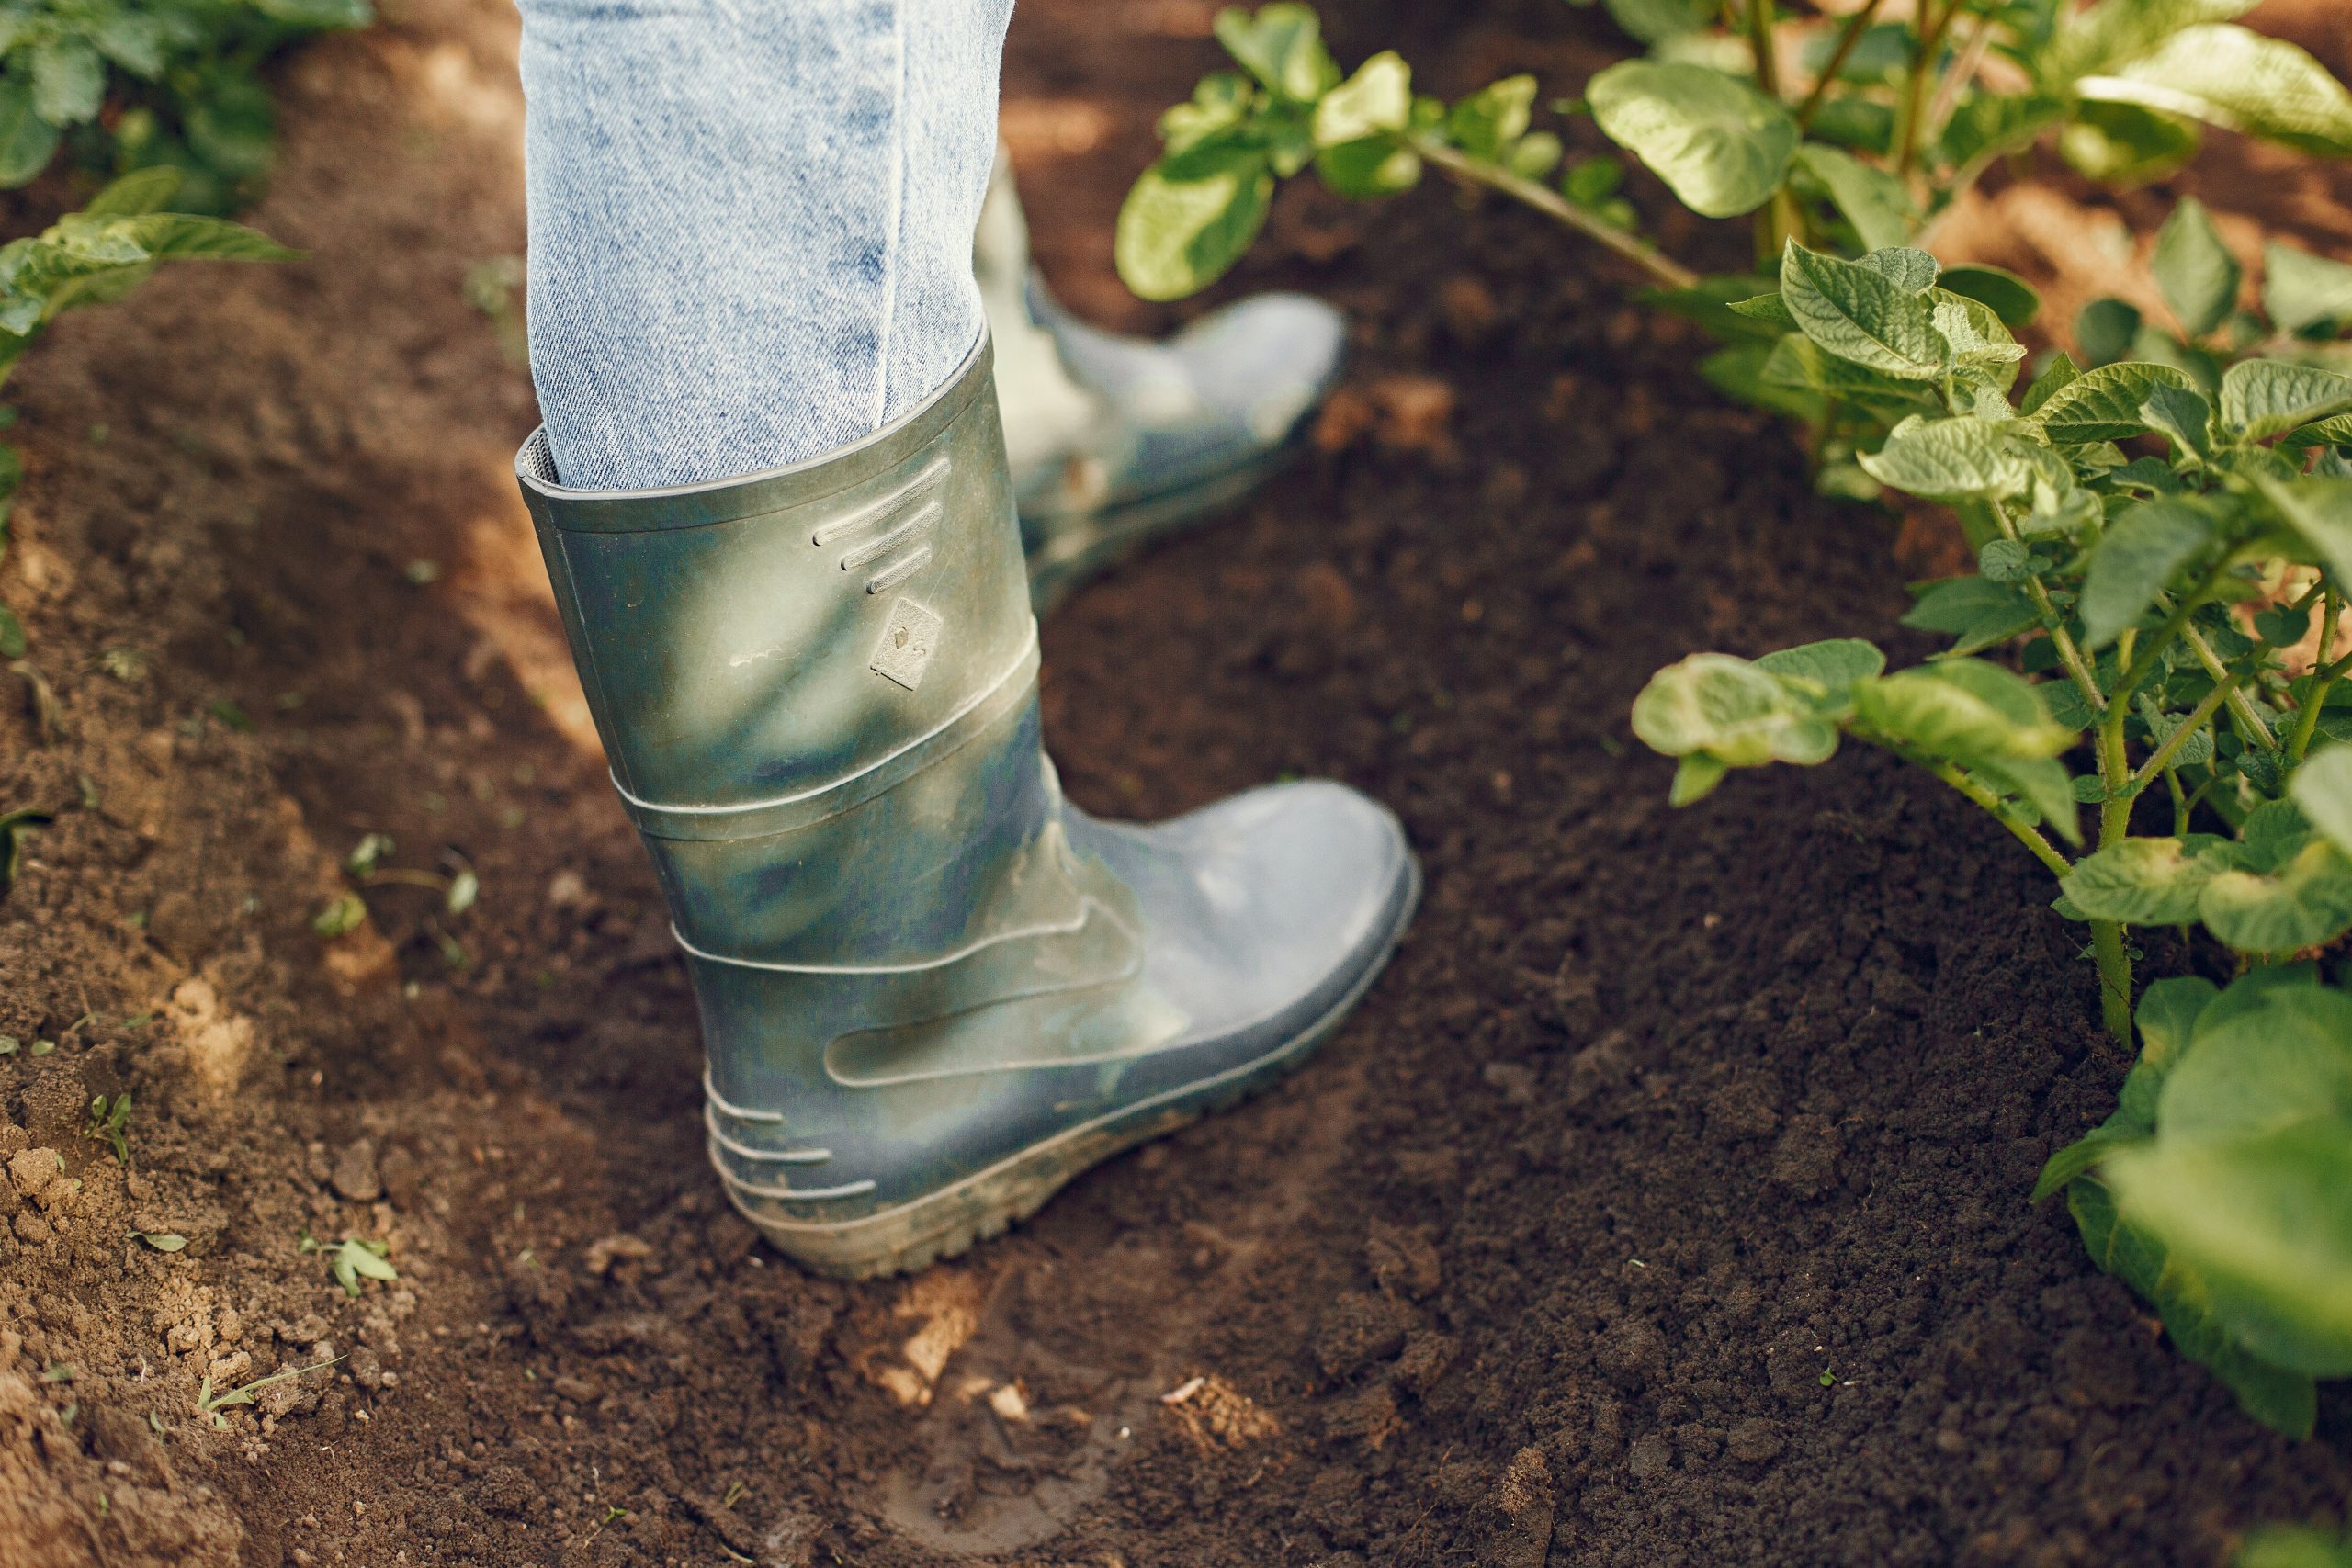 Best Garden Boots for Muddy Conditions: Top Picks for Durable and Waterproof Footwear